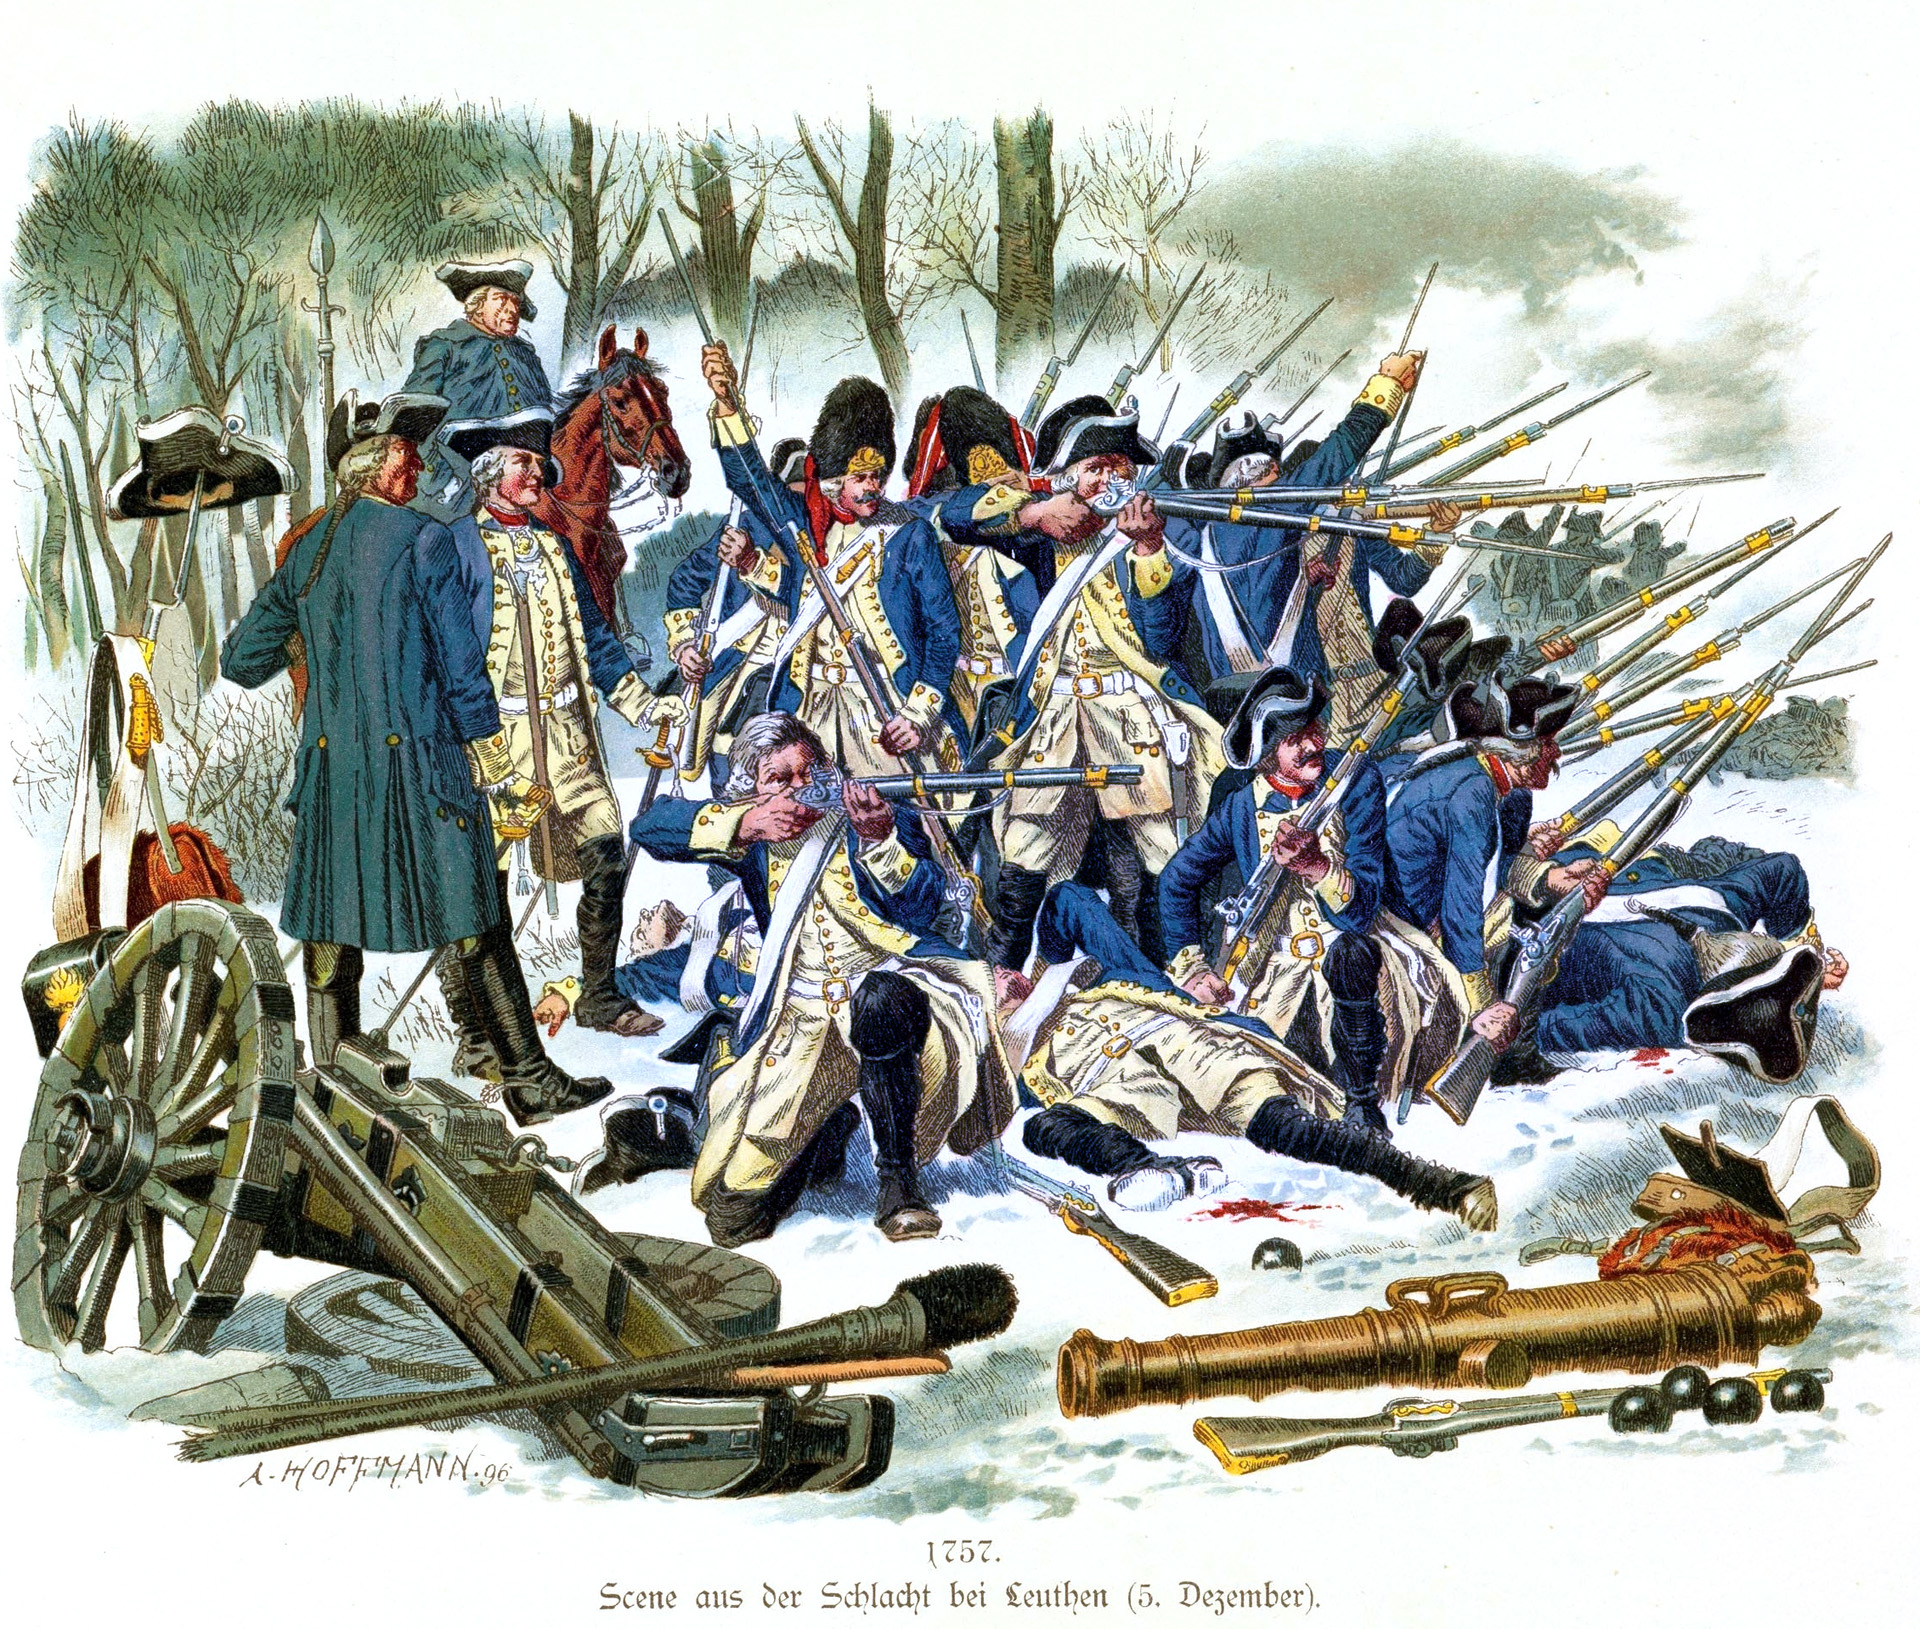 Frederick ensured his musketeers had sufficient ammunition at Leuthen by ordering the wagons laden with ammunition to follow closely behind the advancing infantry. 